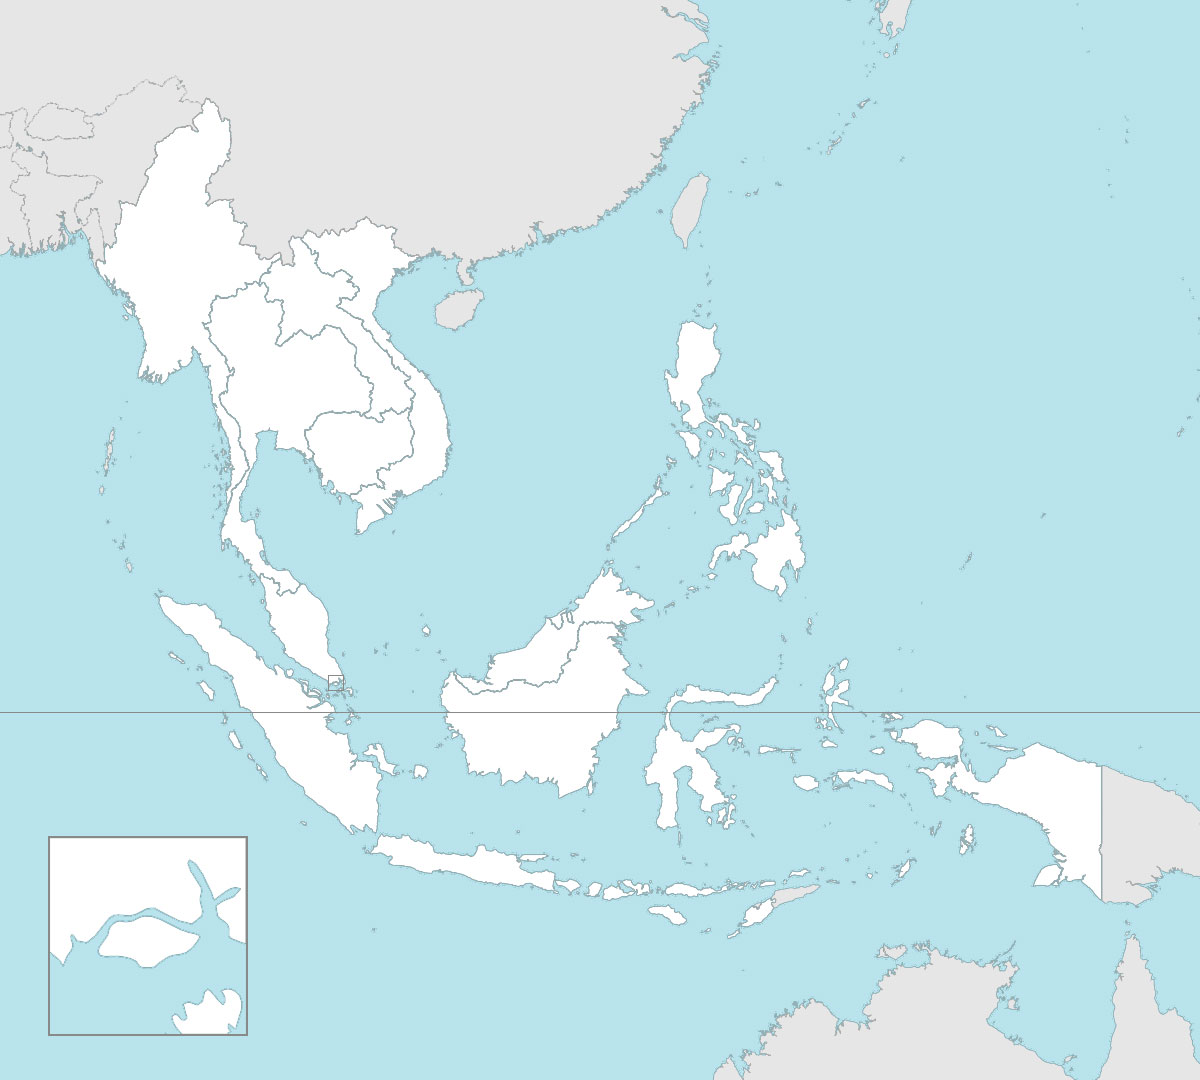 Blank map of ASEAN with countries borders